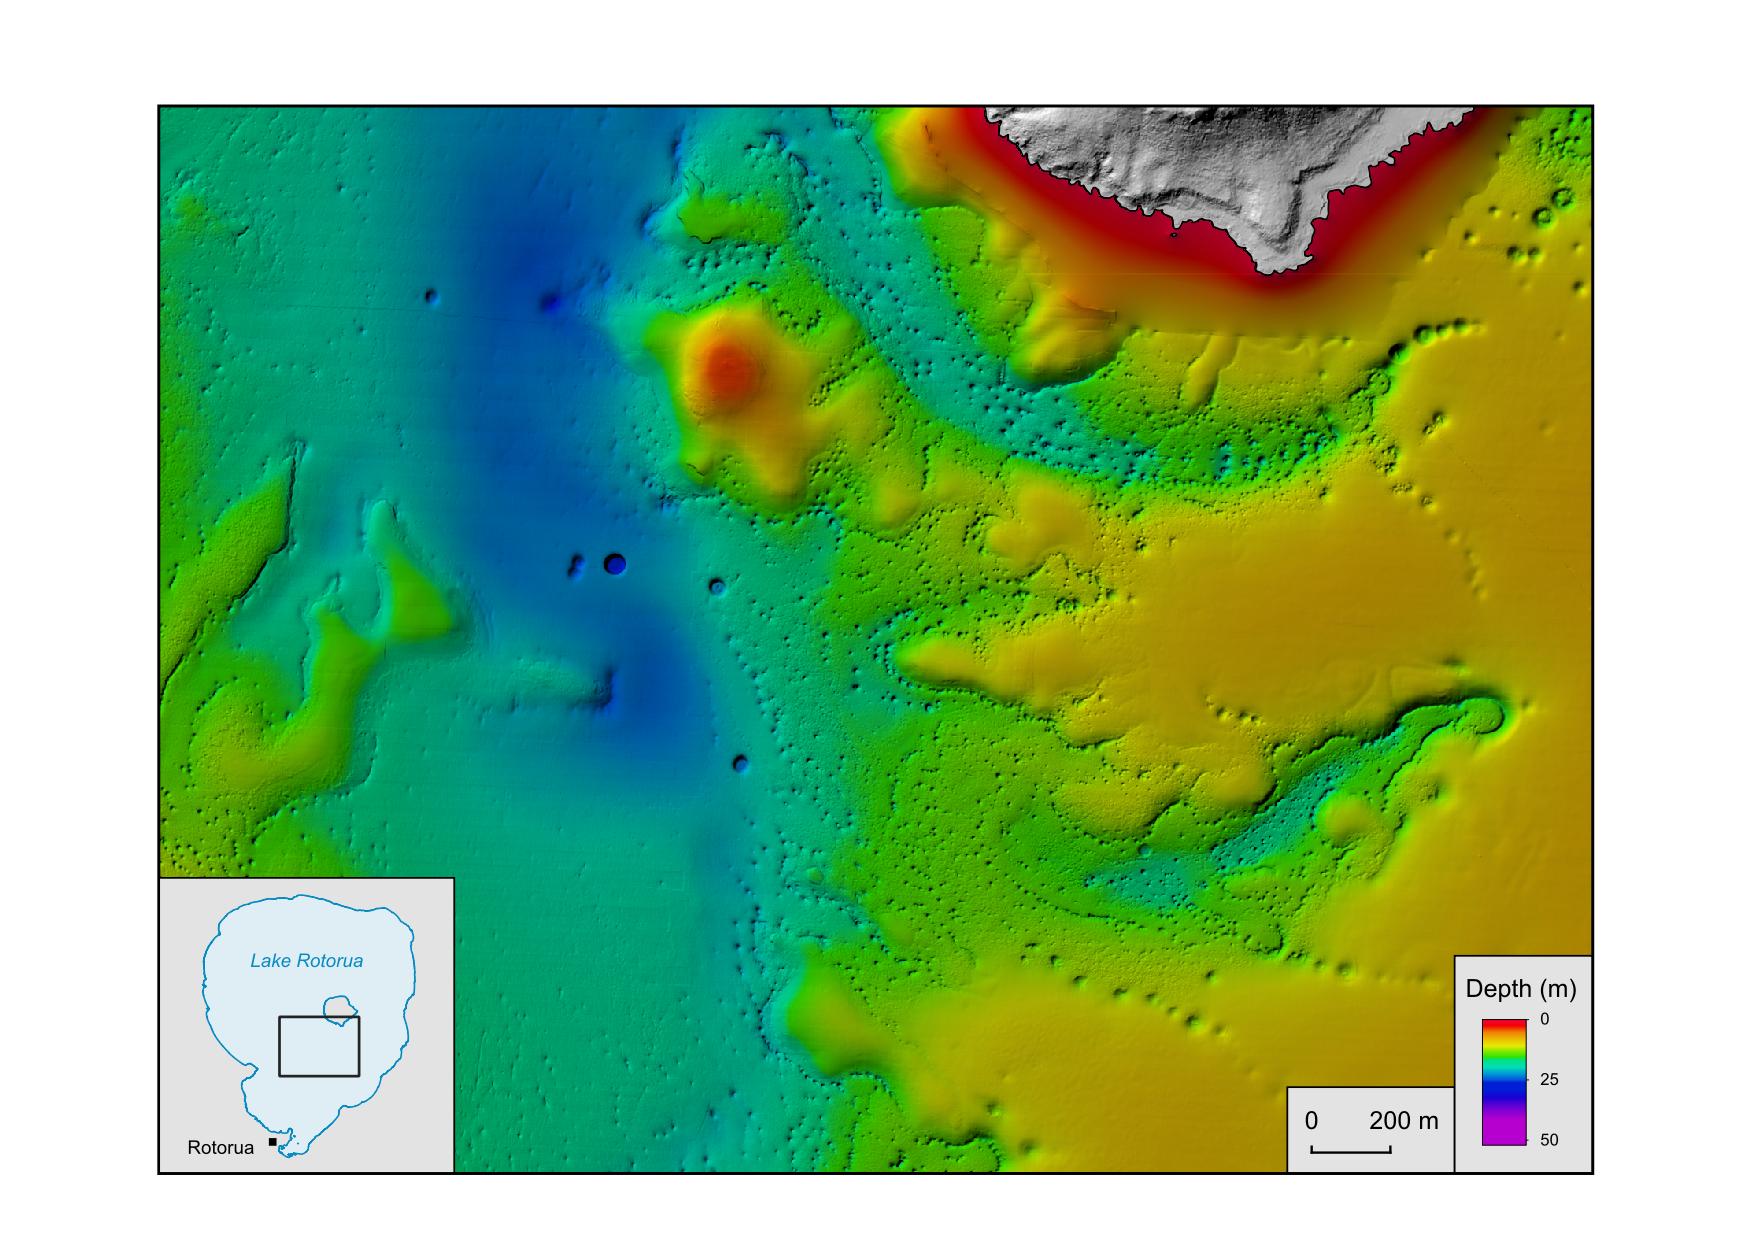 Major 'magnetic anomaly' discovered deep below New Zealand's Lake